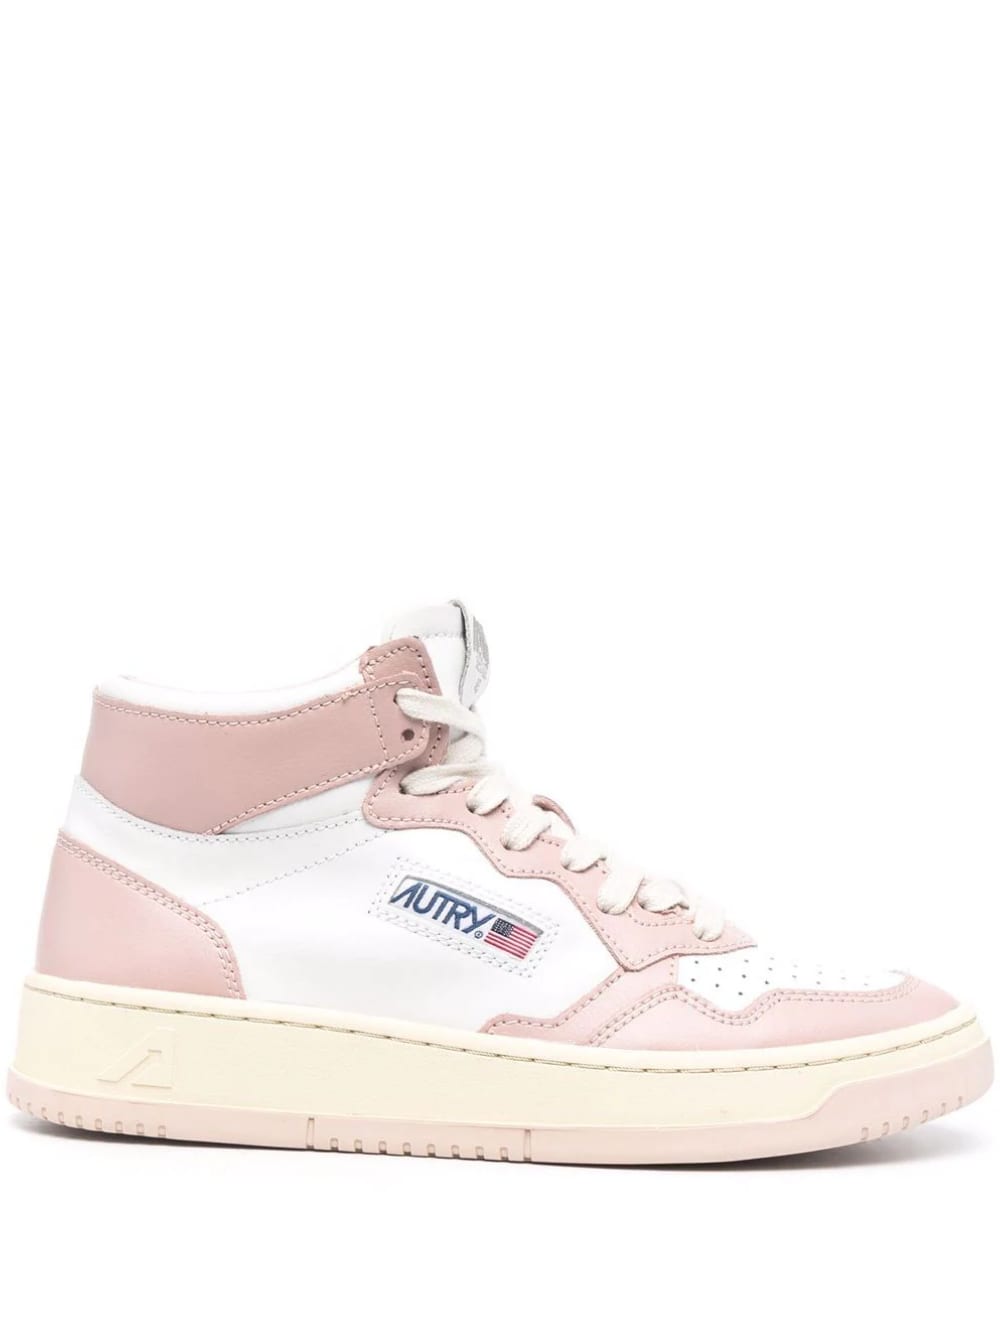 Autry Medalist Mid White And Pink Leather Sneakers